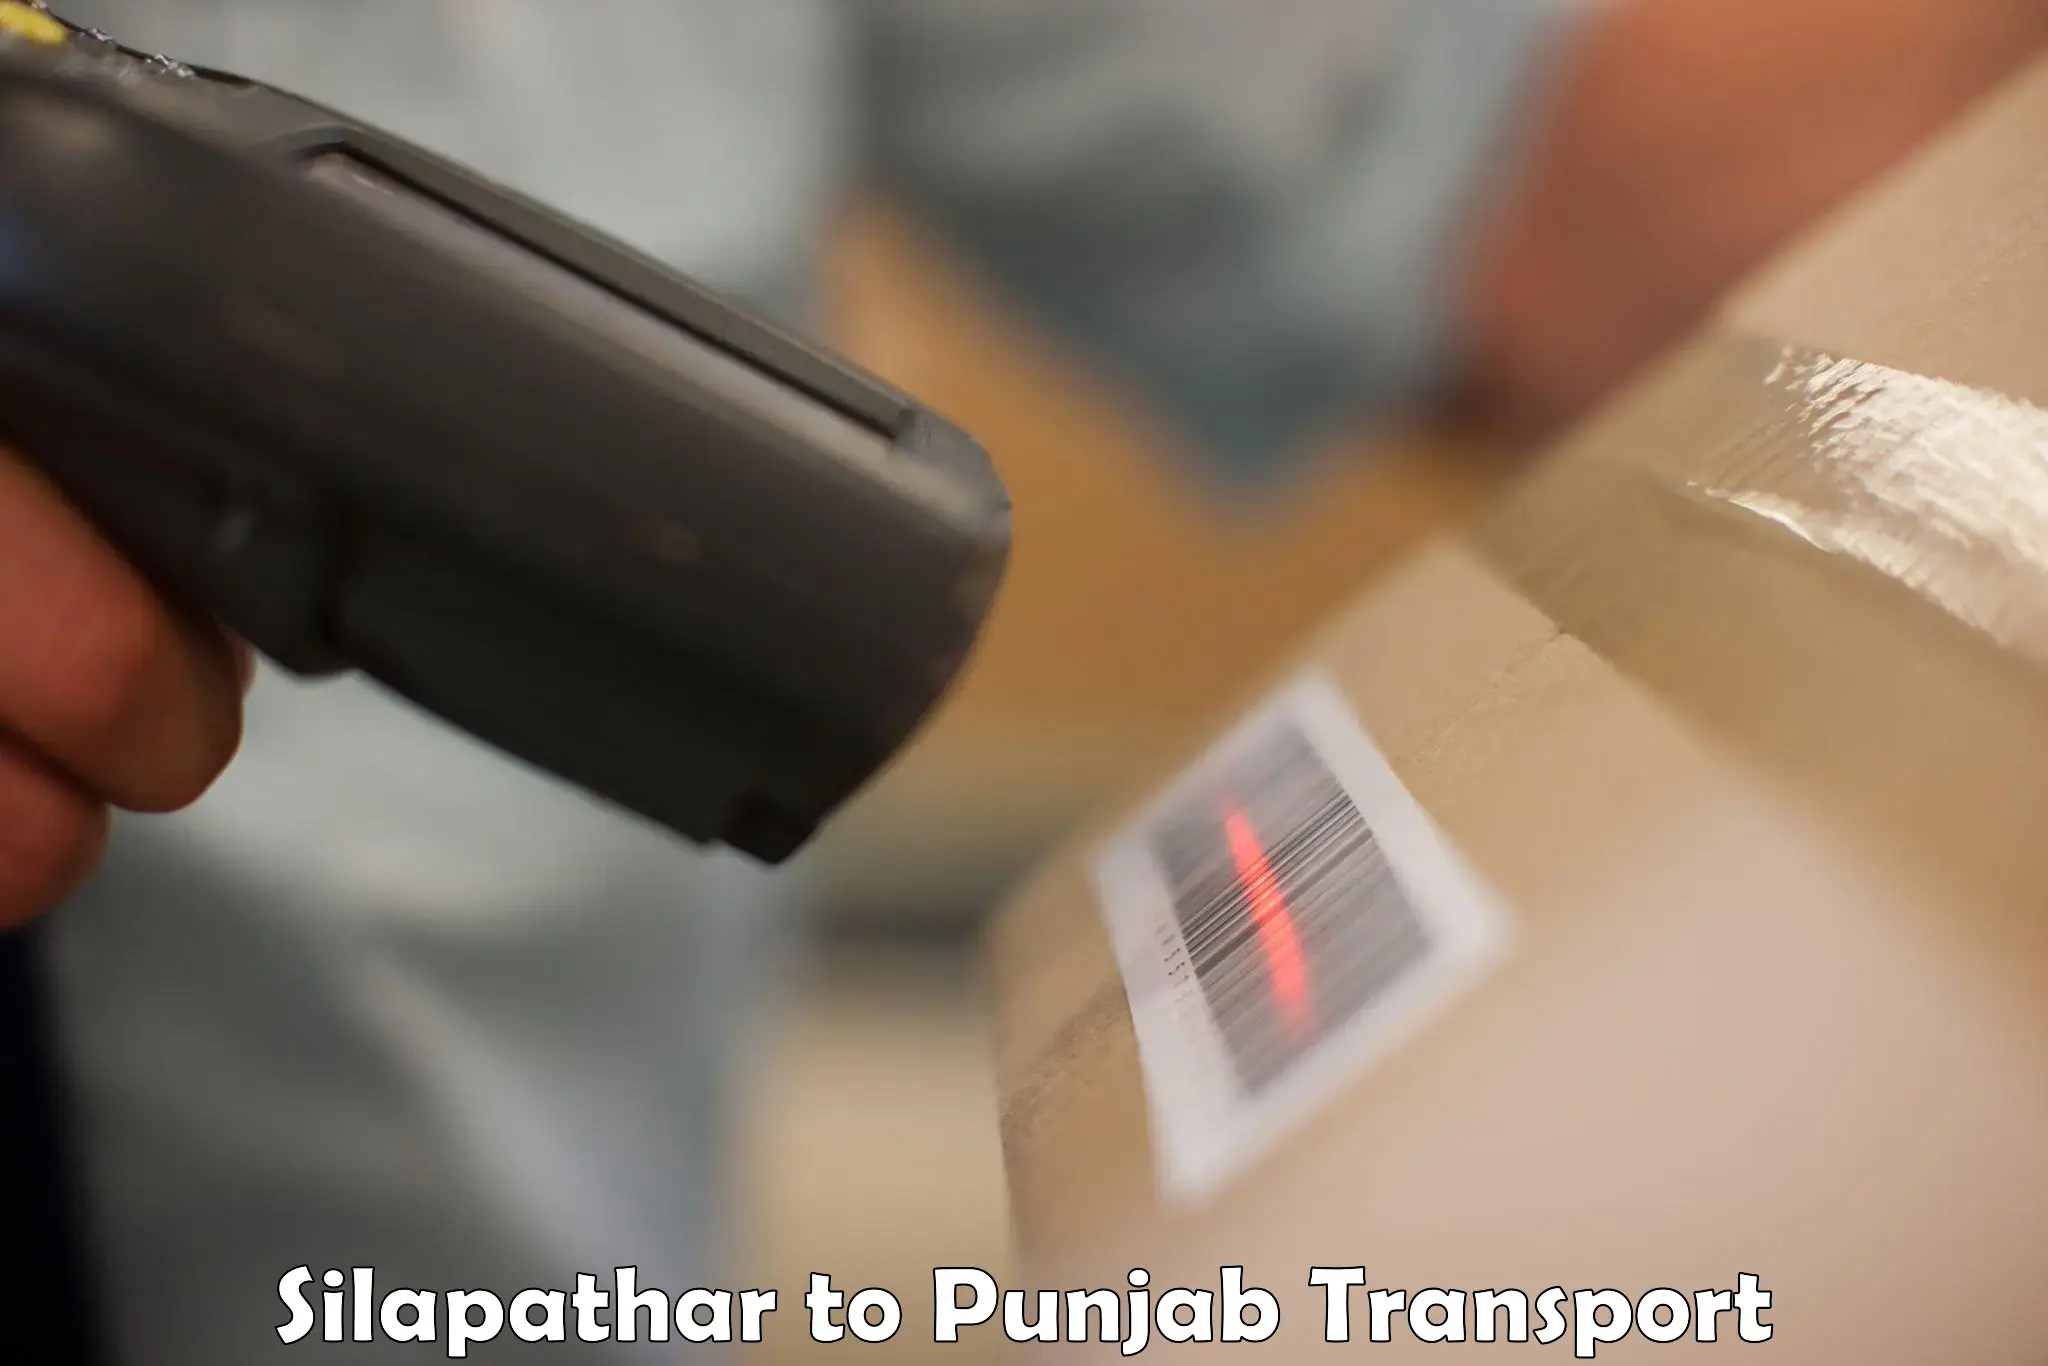 Container transport service Silapathar to Muktsar